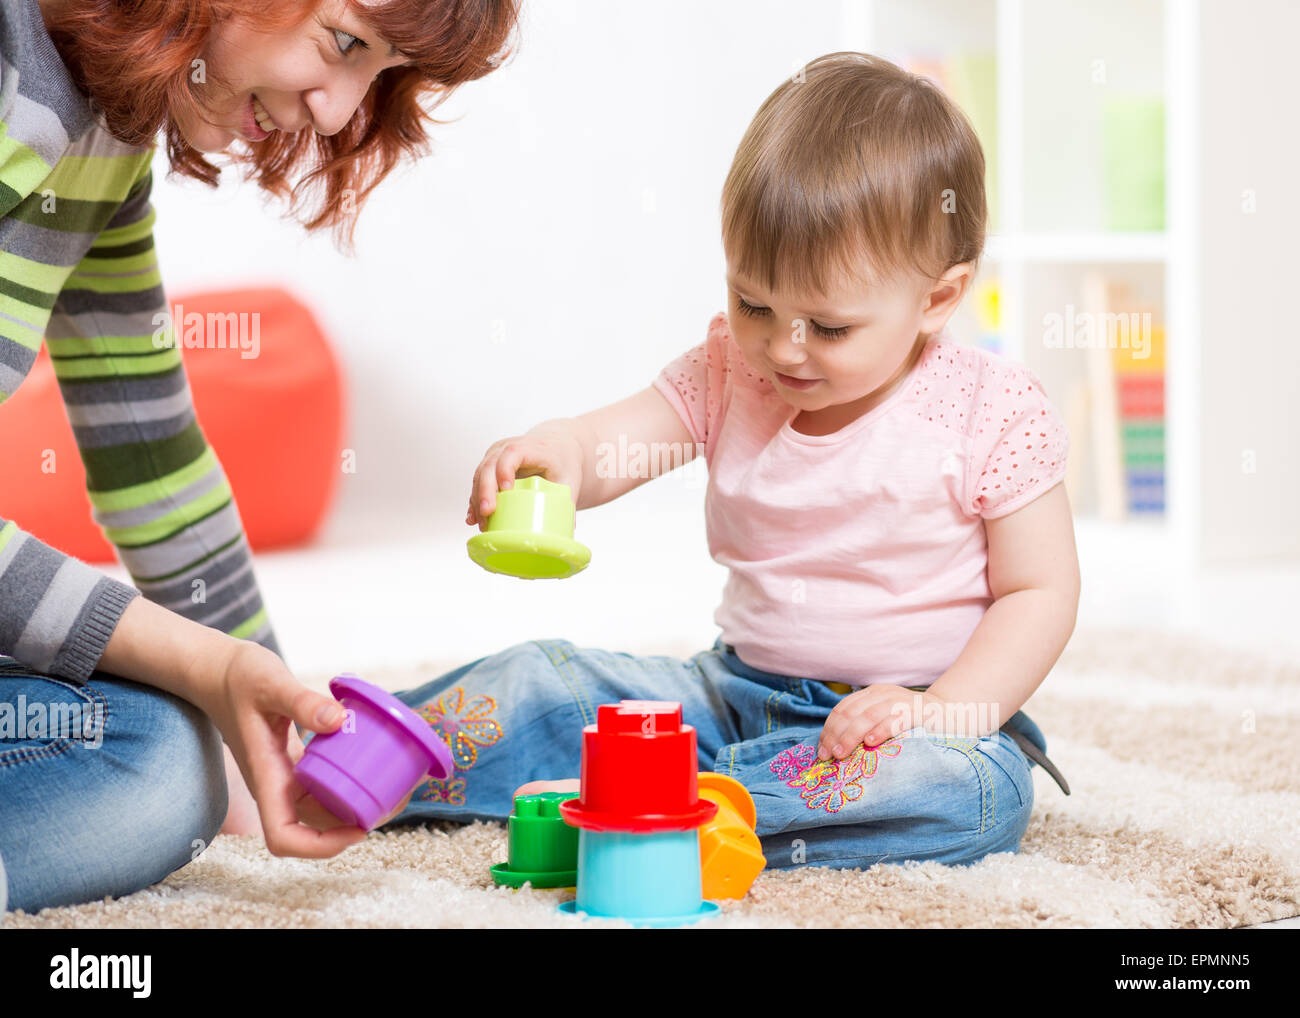 mother and child toddler play toys at home Stock Photo